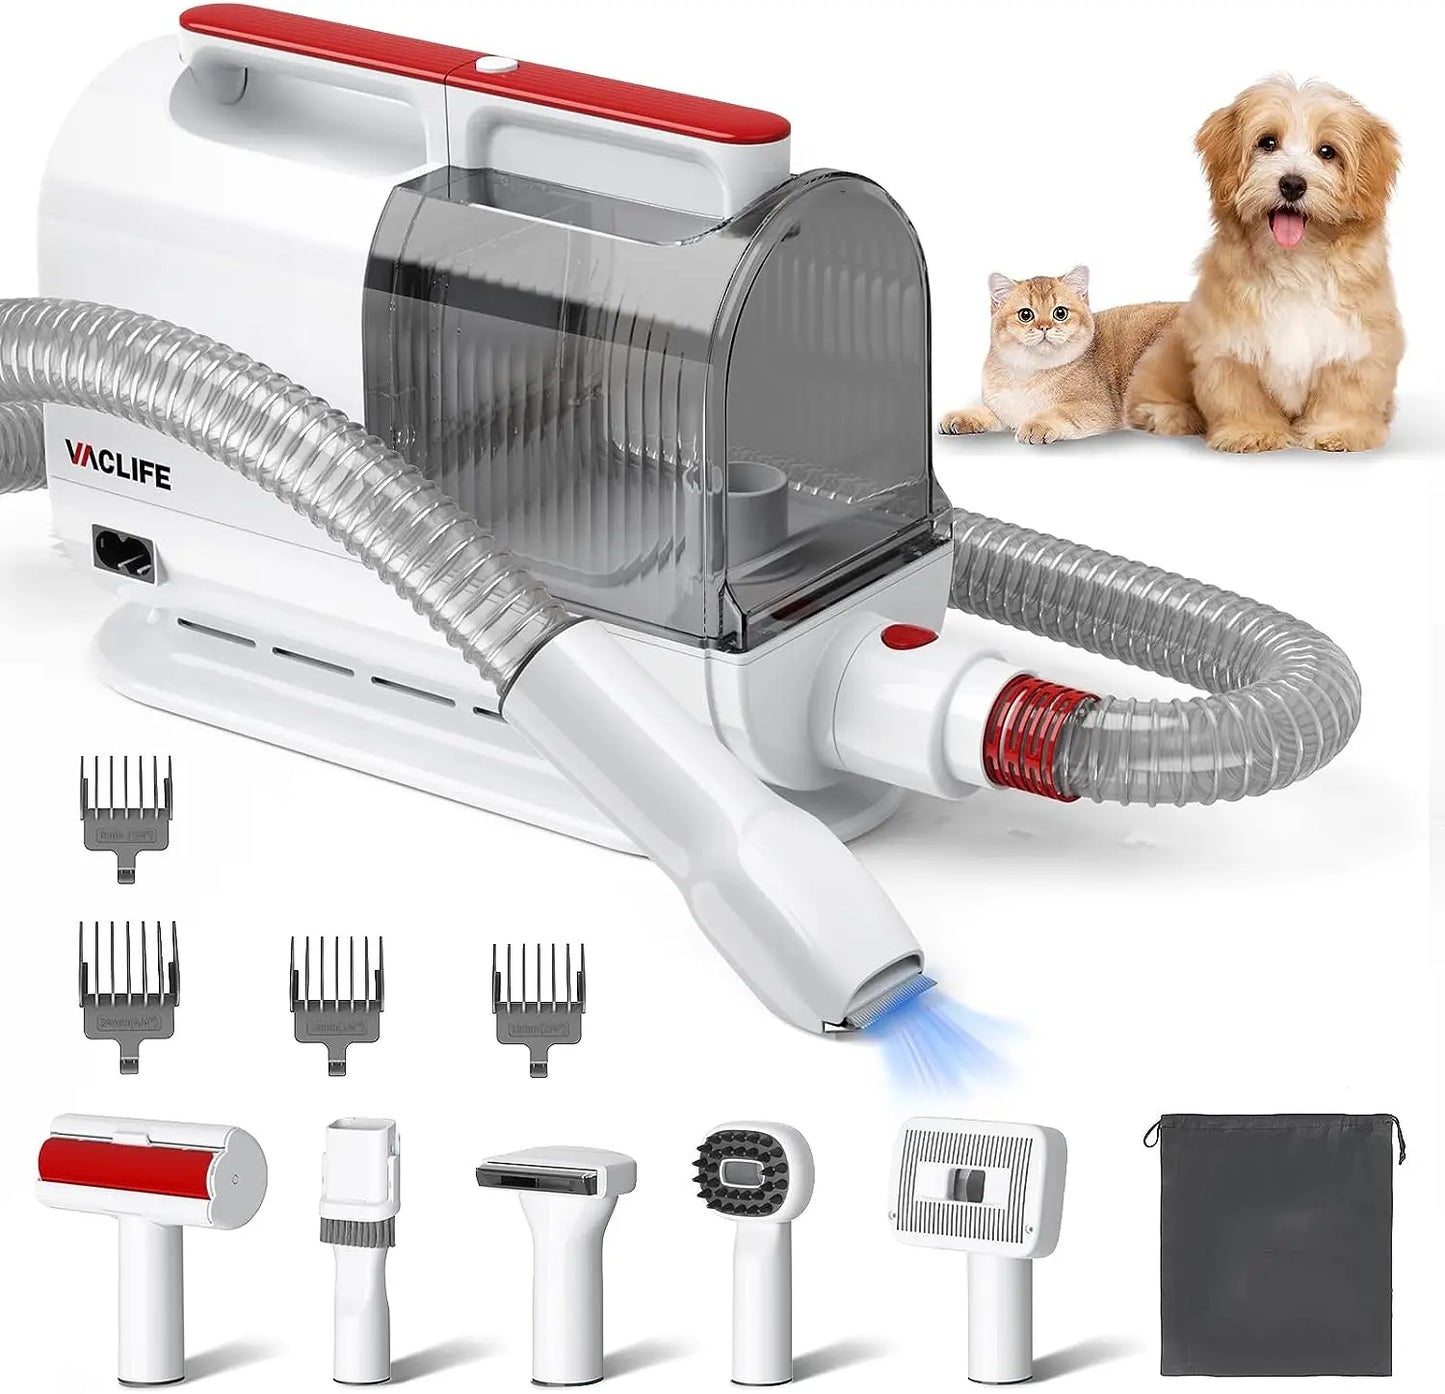 VacLife Pet Hair Vacuum For Shedding Grooming With Dog Clipper - Multipurpose Dog Grooming Kit With Brushes And Other Grooming Tools For Dogs And Cats - Low-Noise - White And Red - Image #4